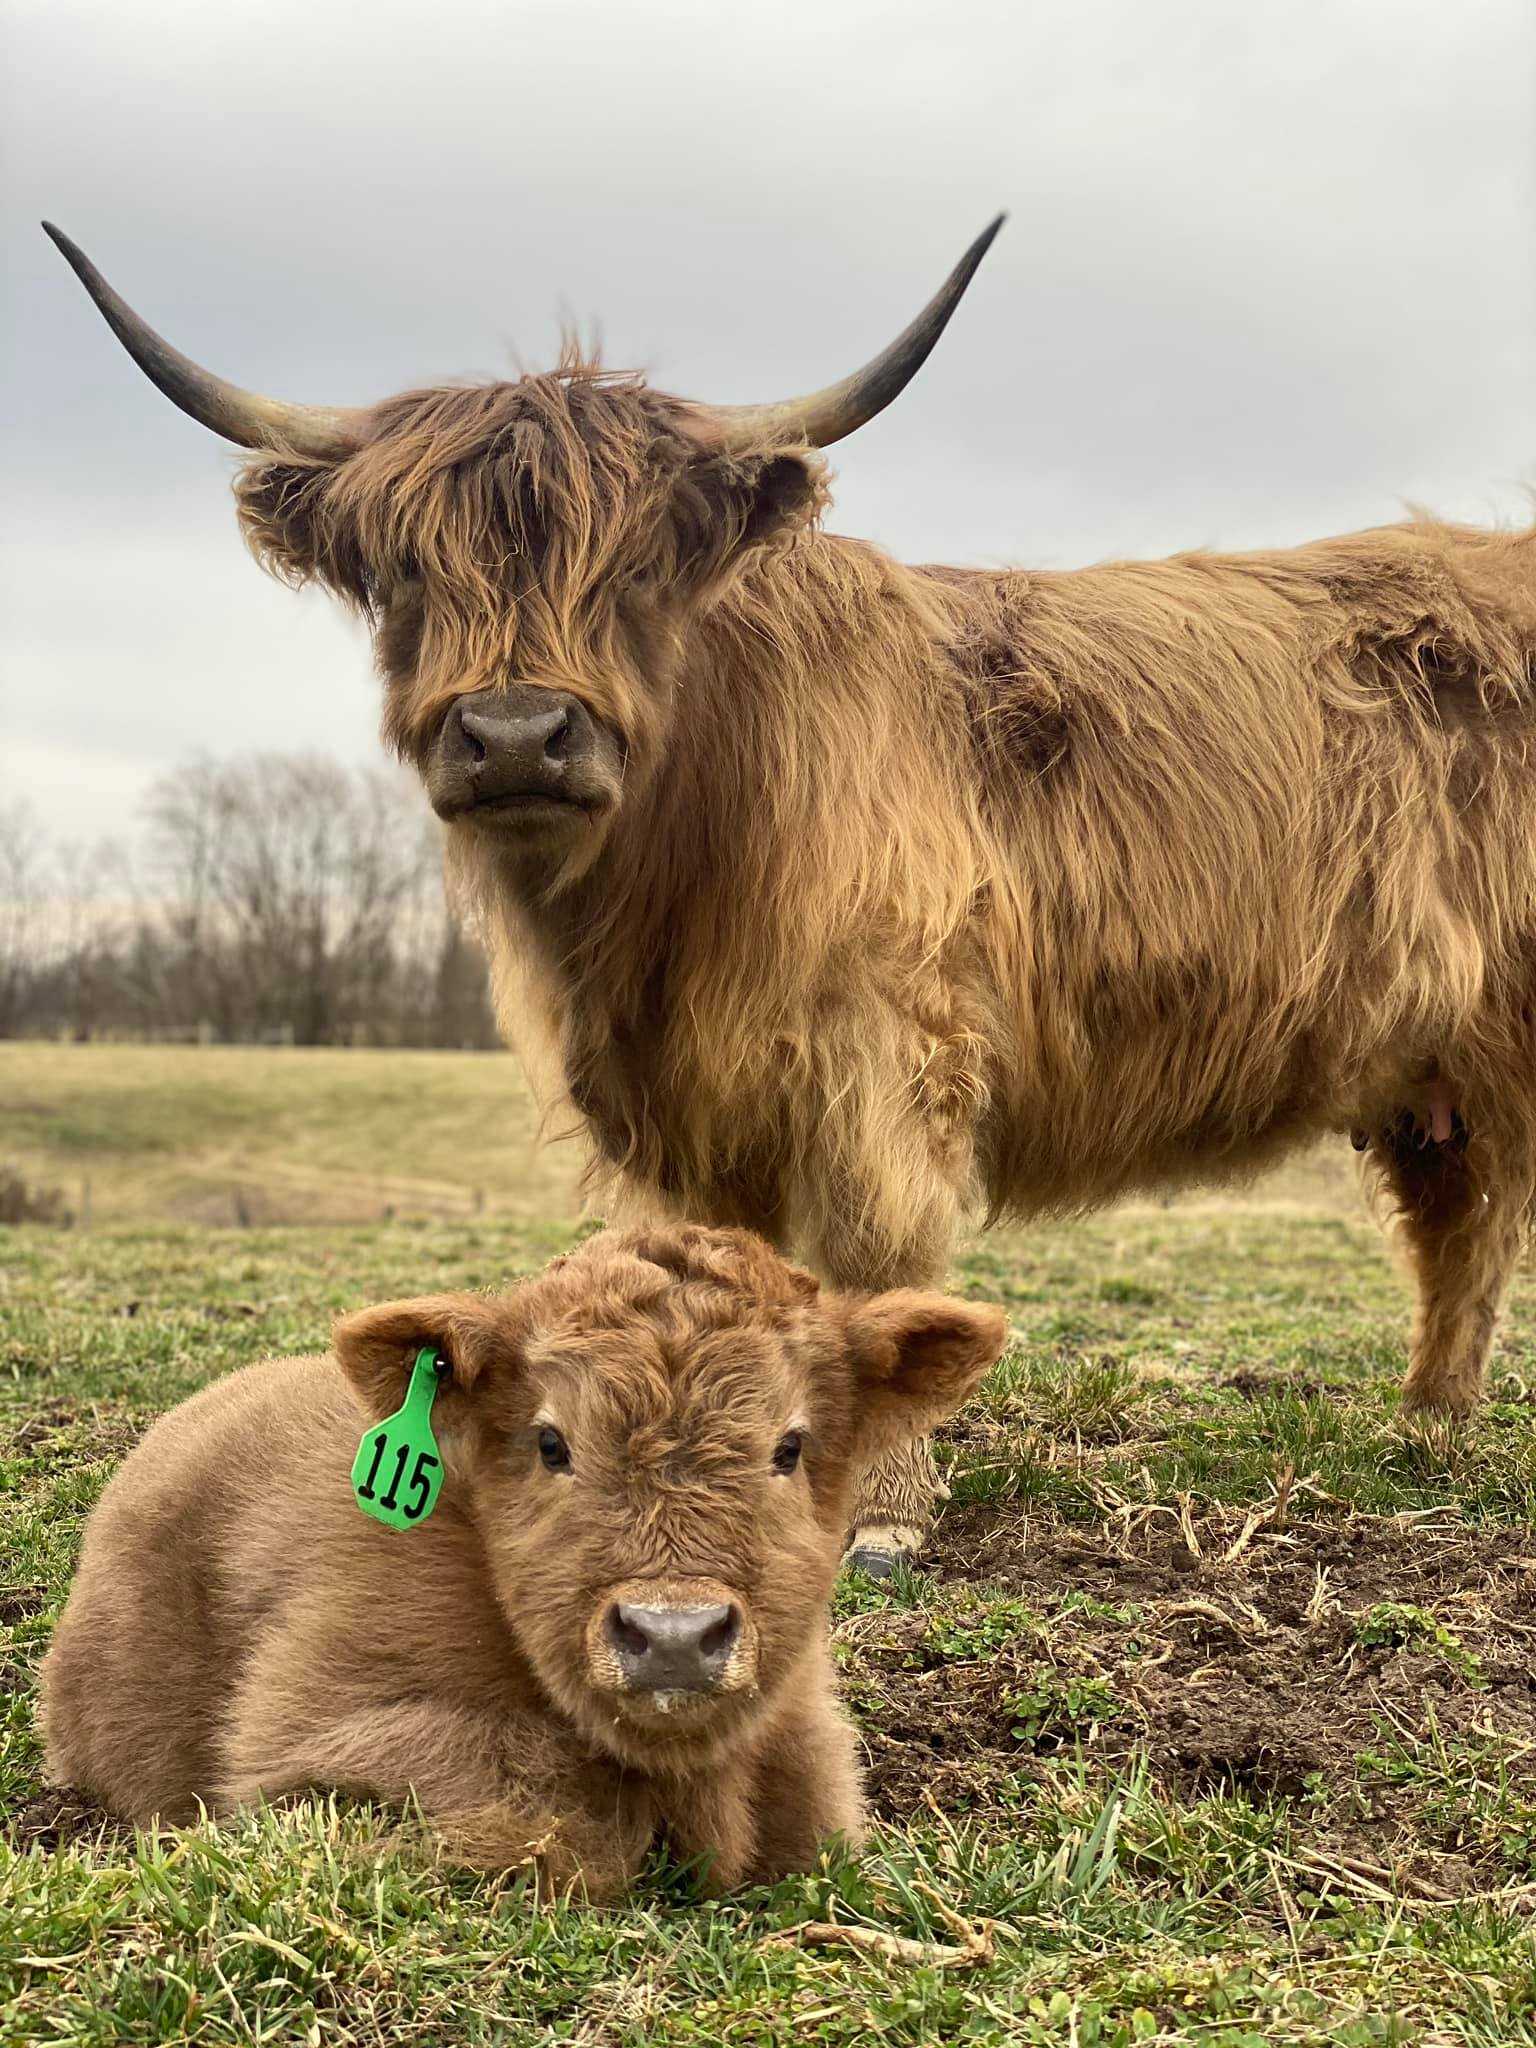 This farm in Kentucky is home to cows so fluffy, you'll want to hug them